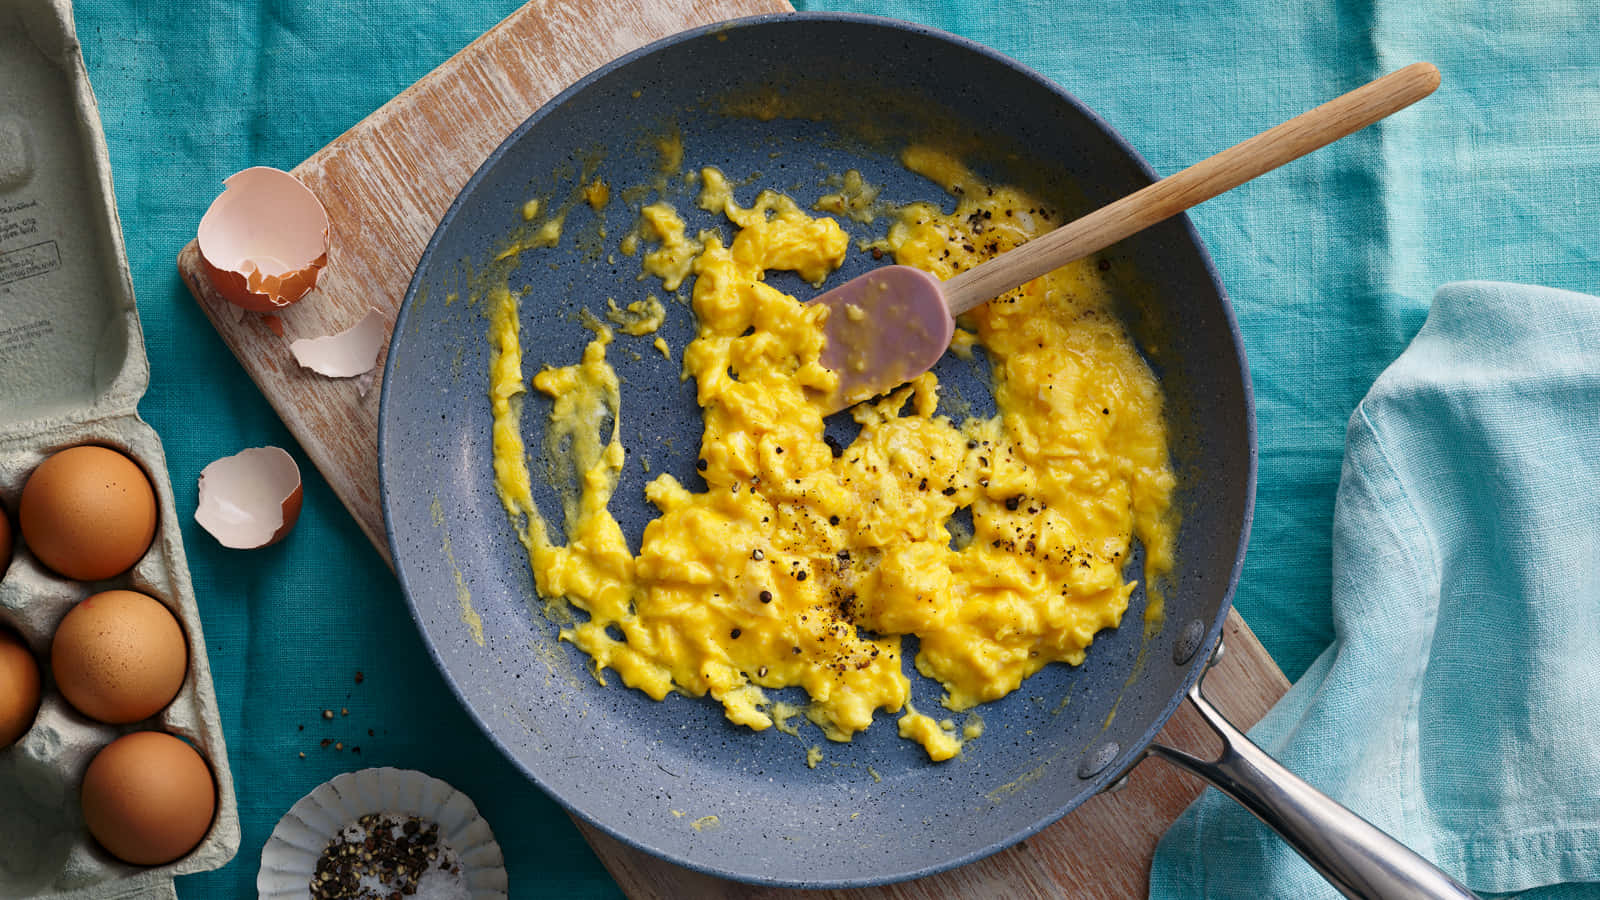 Enjoy a delicious plate of scrambled eggs for breakfast today!